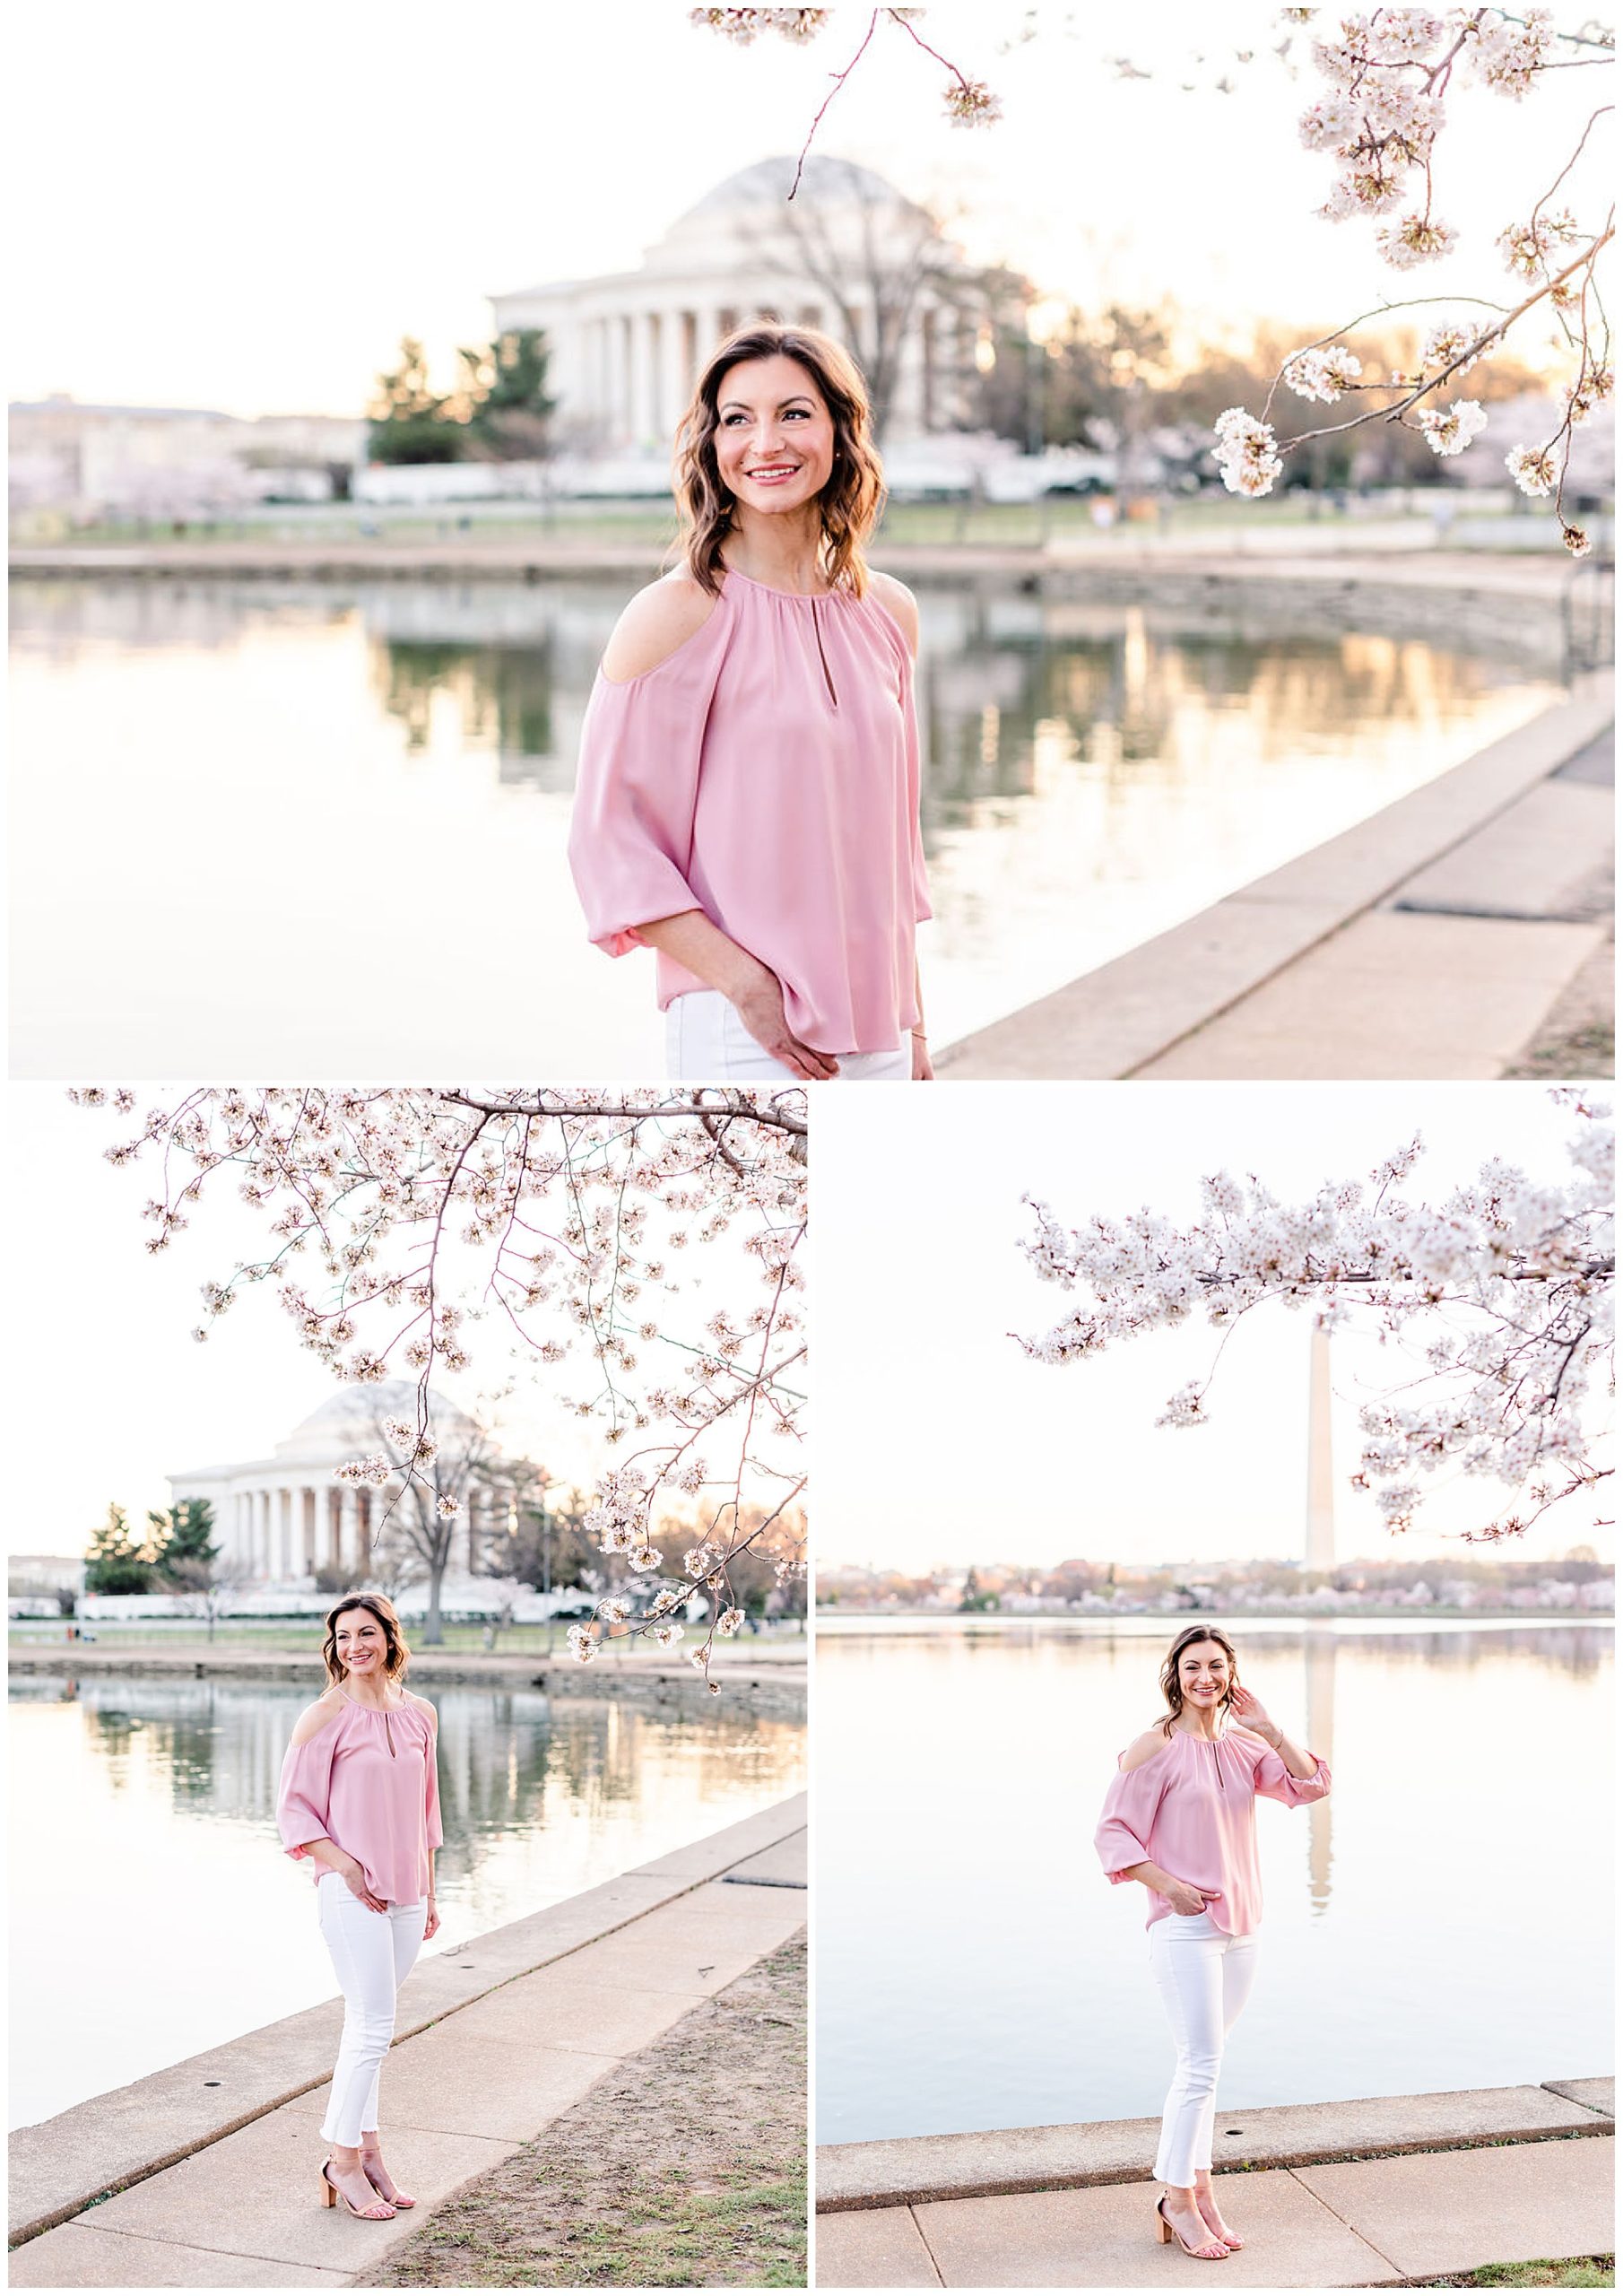 D.C. cherry blossoms headshots, cherry blossoms brand photos, DC peak bloom cherry blossoms, DC cherry blossoms photography, DC cherry blossoms photographer, DC cherry blossoms season, Rachel E.H. Photography, female headshots, woman smiling, woman brushing hair behind ear, woman with hand in pocket, pink blouse